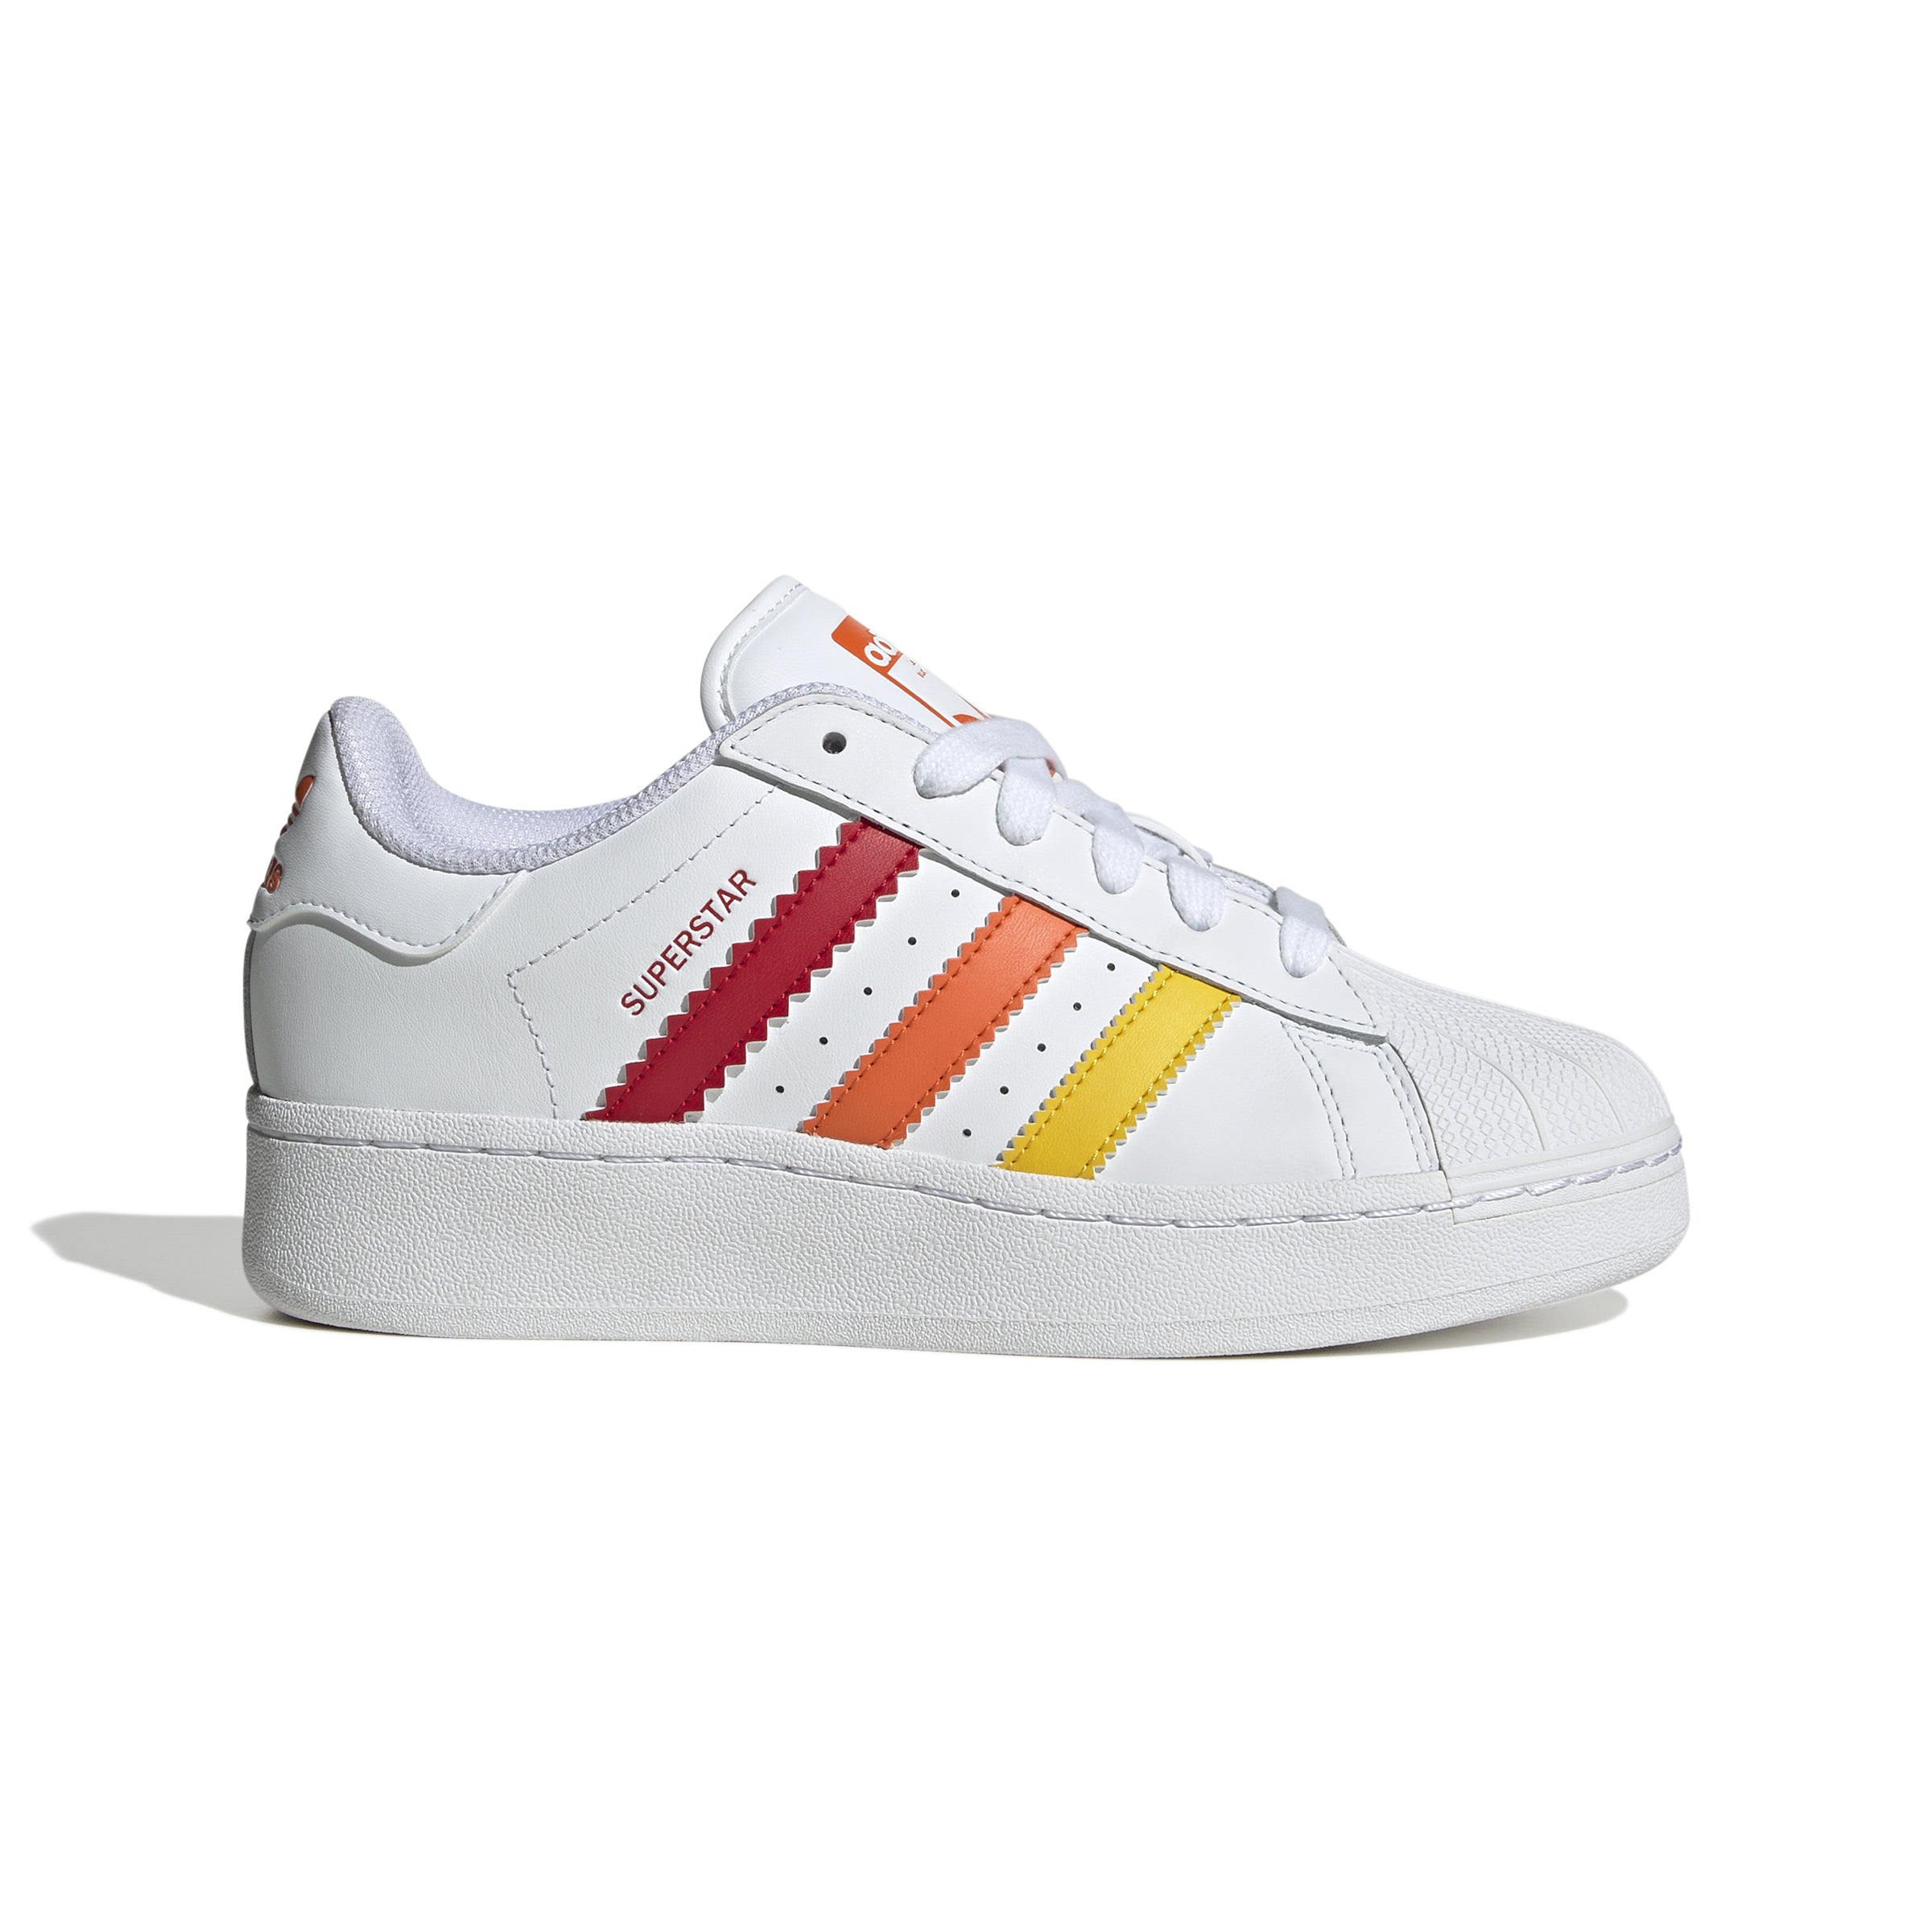 ADIDAS SUPERSTAR XLG W IF9122 SNEAKER (W)